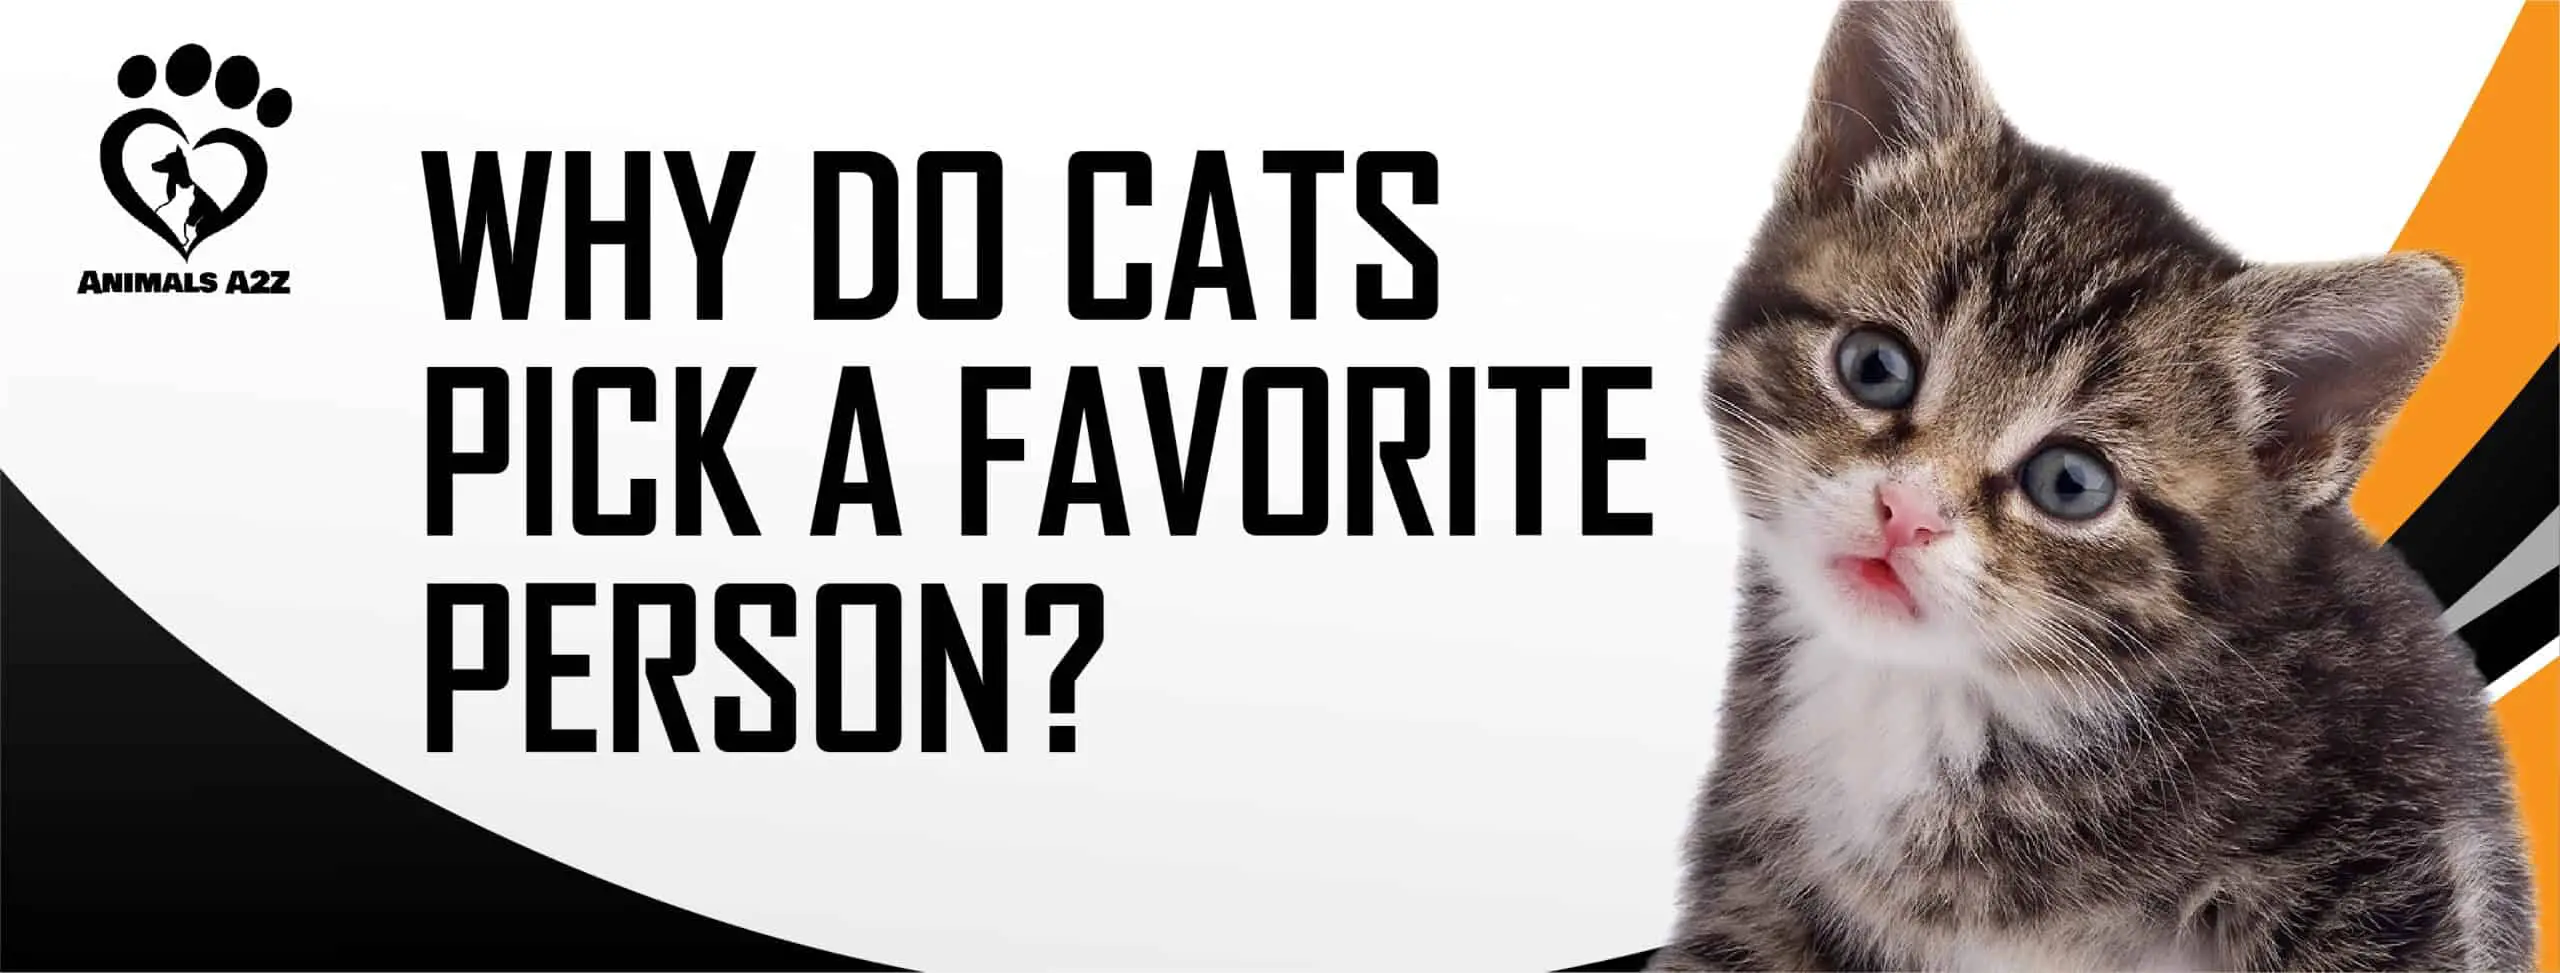 Why do cats pick a favorite person